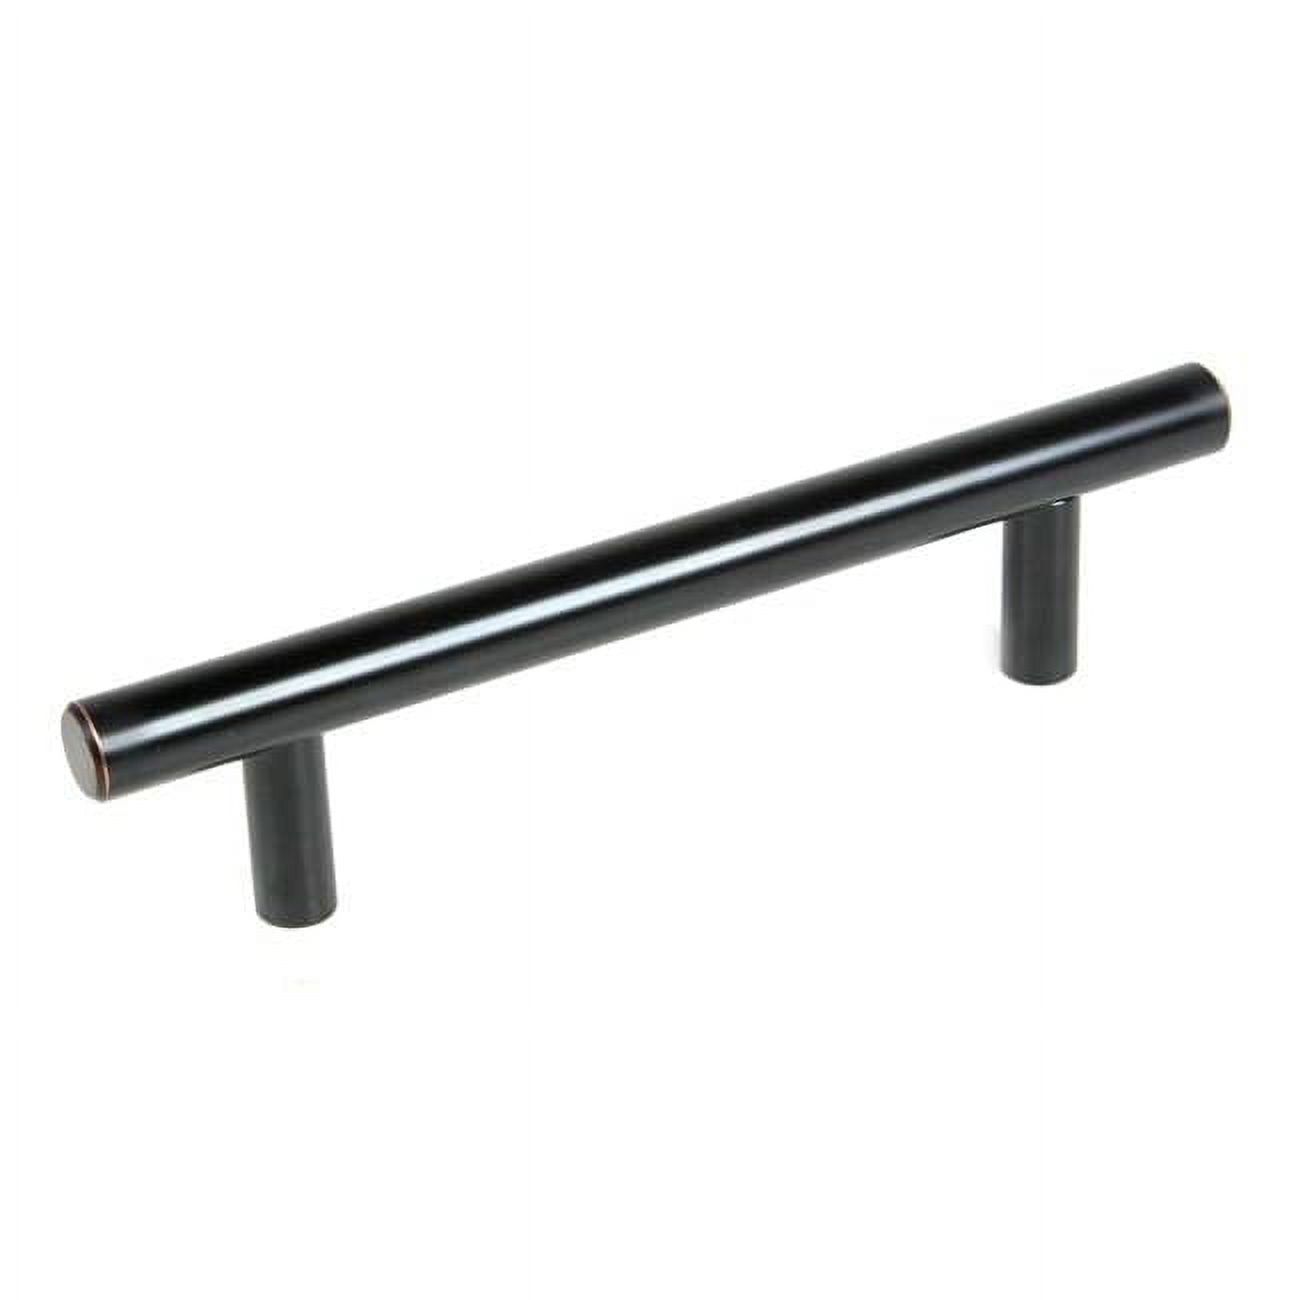 6" Solid Oil Rubbed Bronze Cabinet Bar Pull Handle 6-inch (150mm) Solid Oil Rubbed Bronze Cabinet Bar Pull Handles (Case of 5) - image 1 of 5